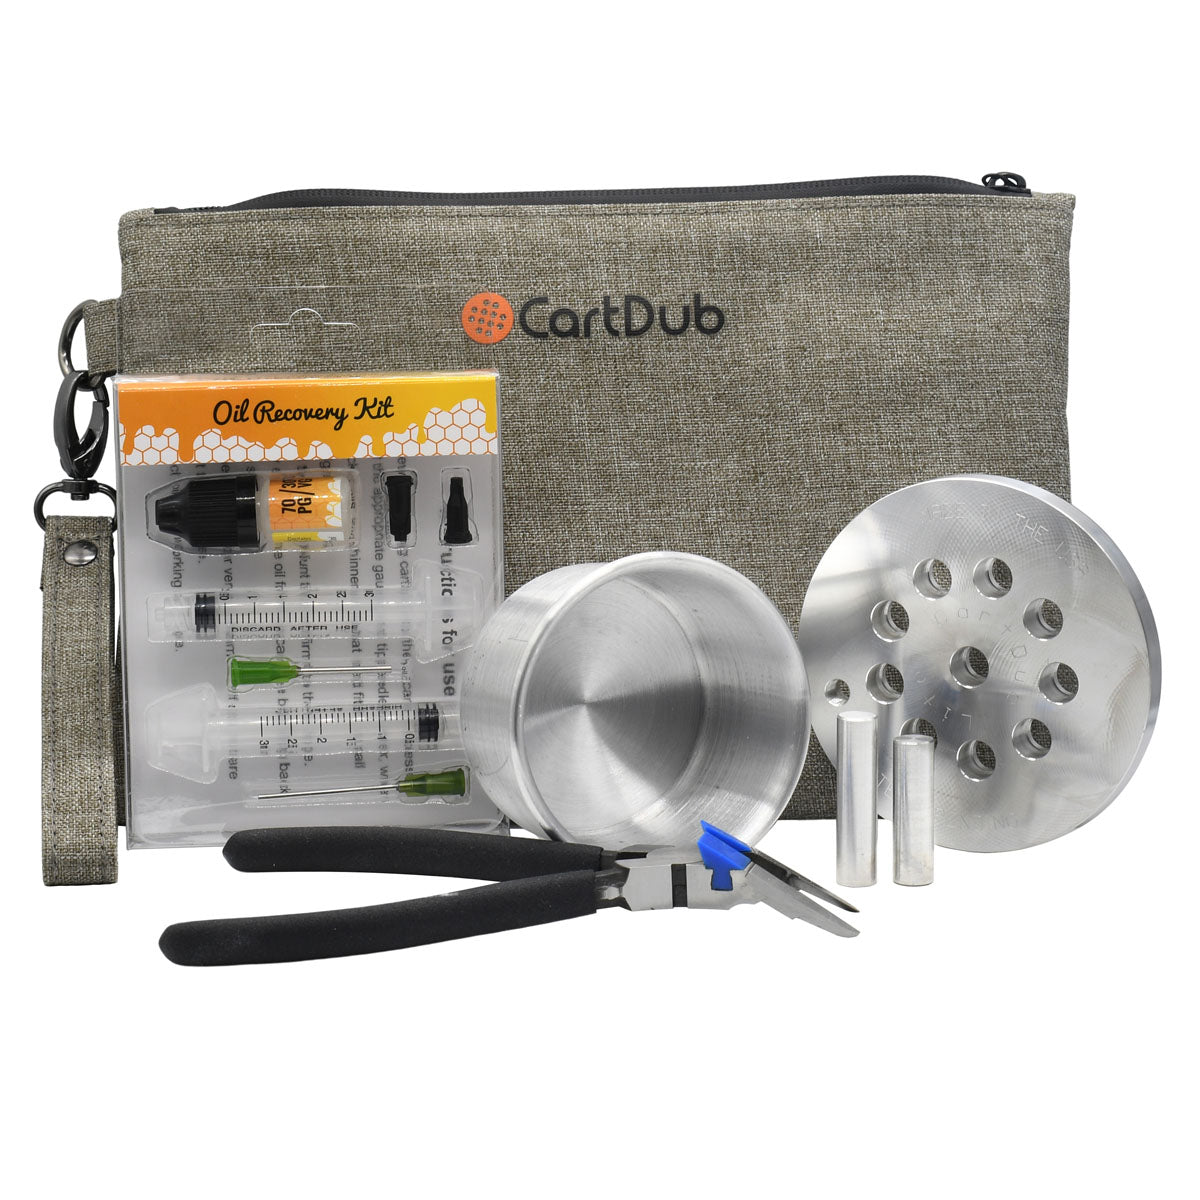 CartDub PLUS Complete Kit - open and remove oil from carts